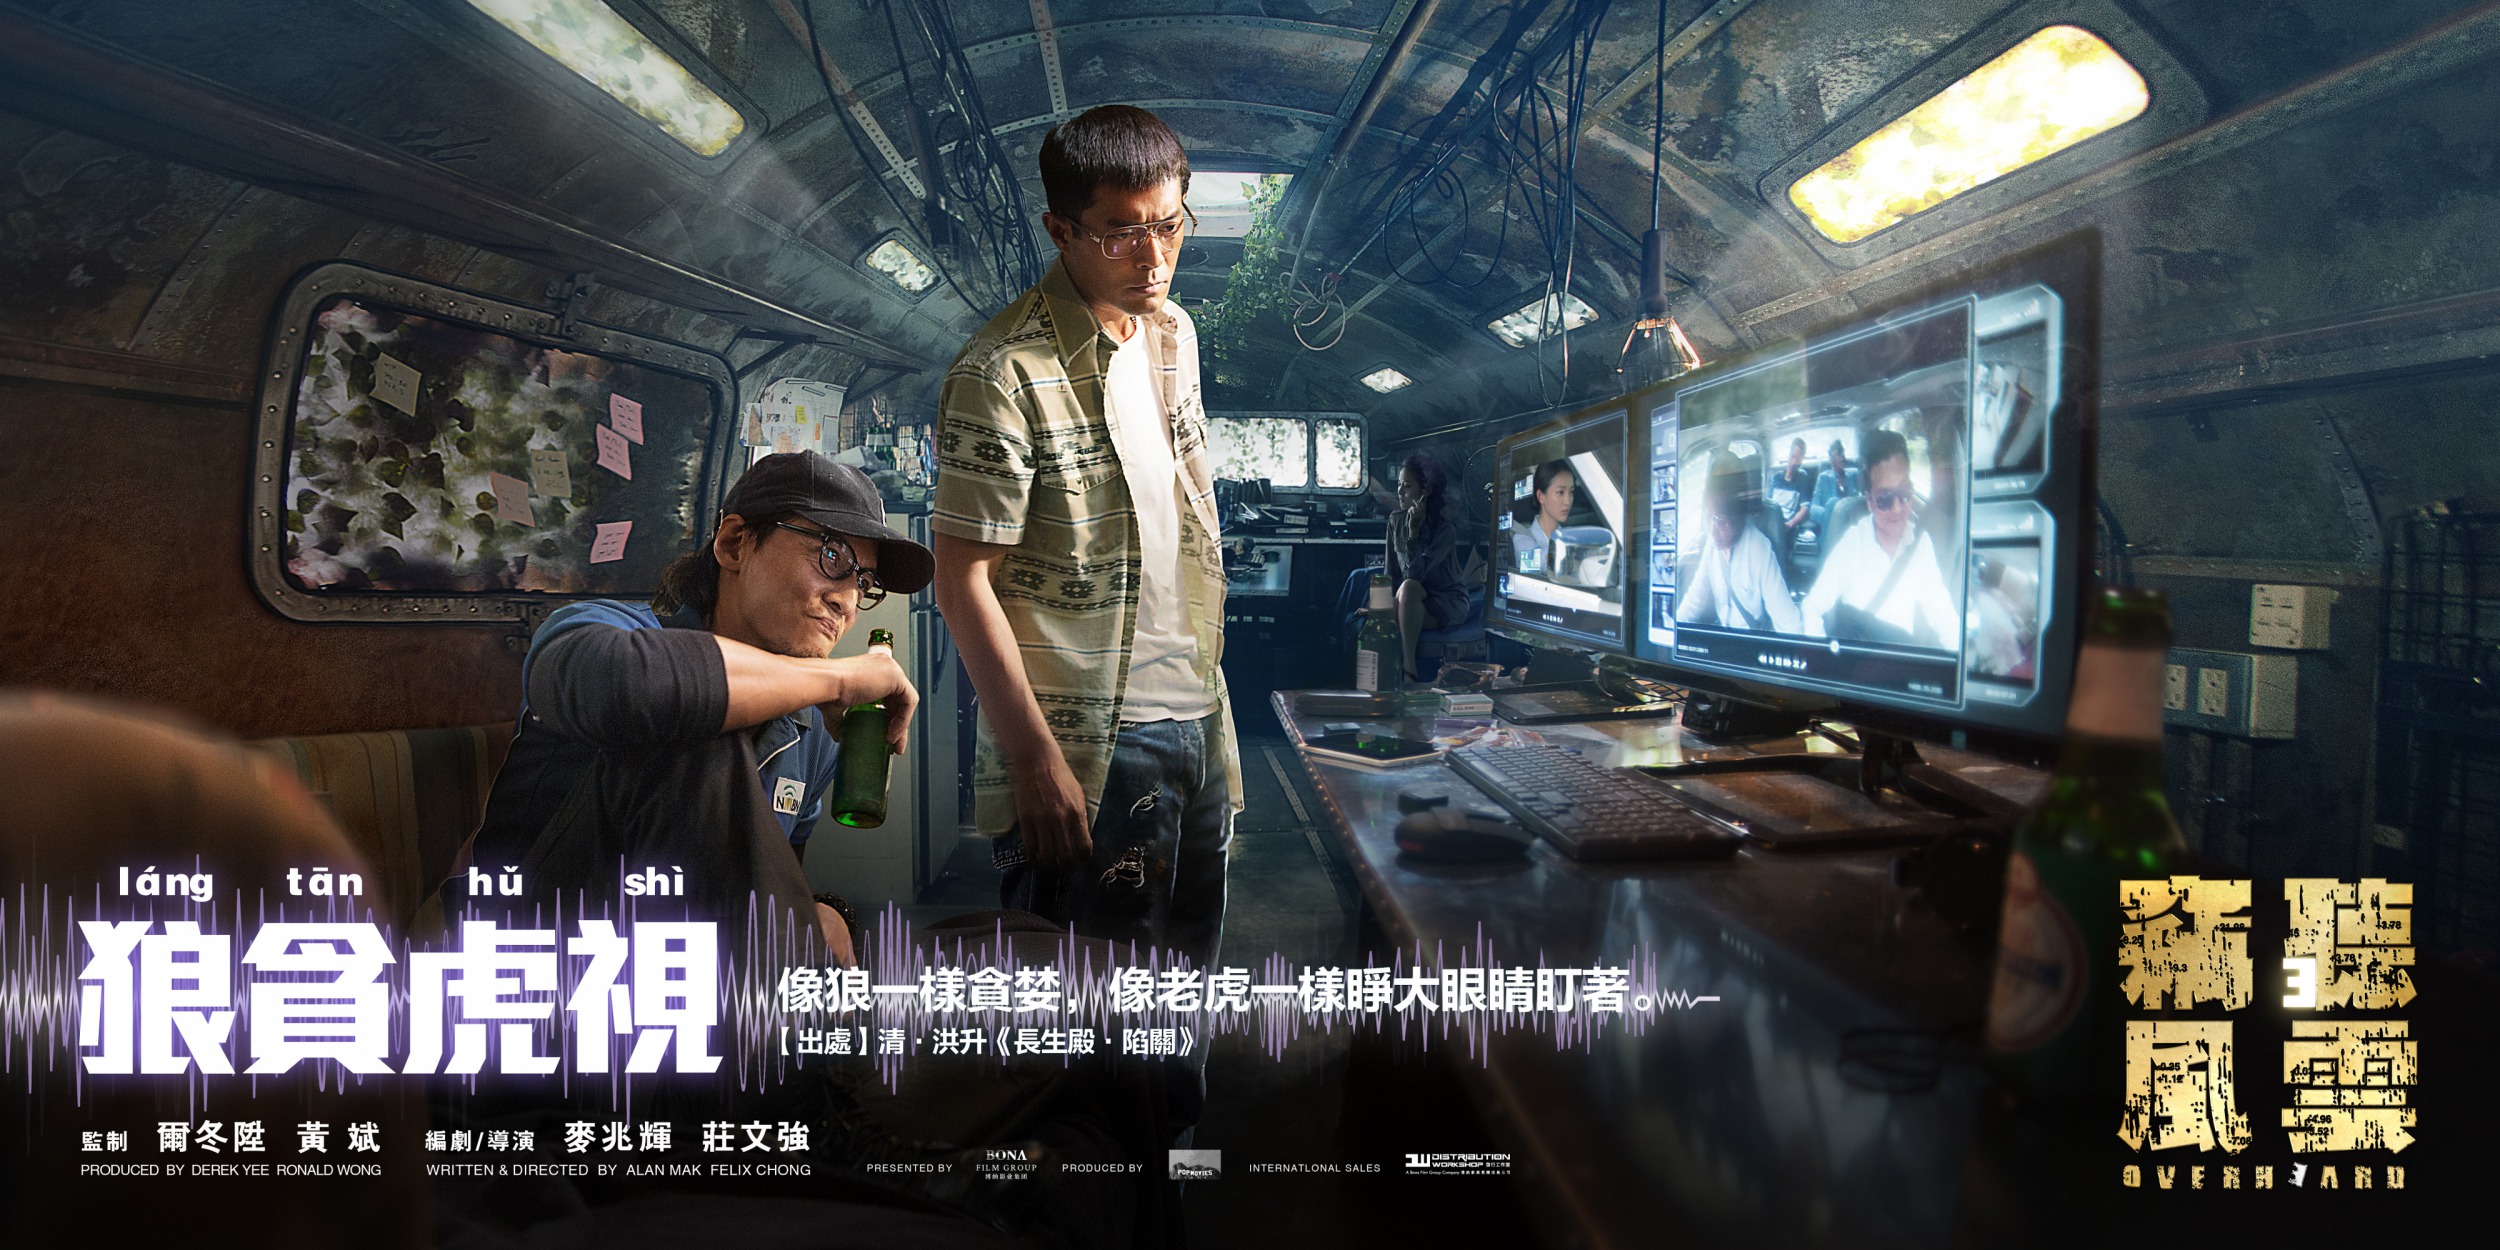 Mega Sized Movie Poster Image for Sit ting fung wan 3 (#2 of 7)